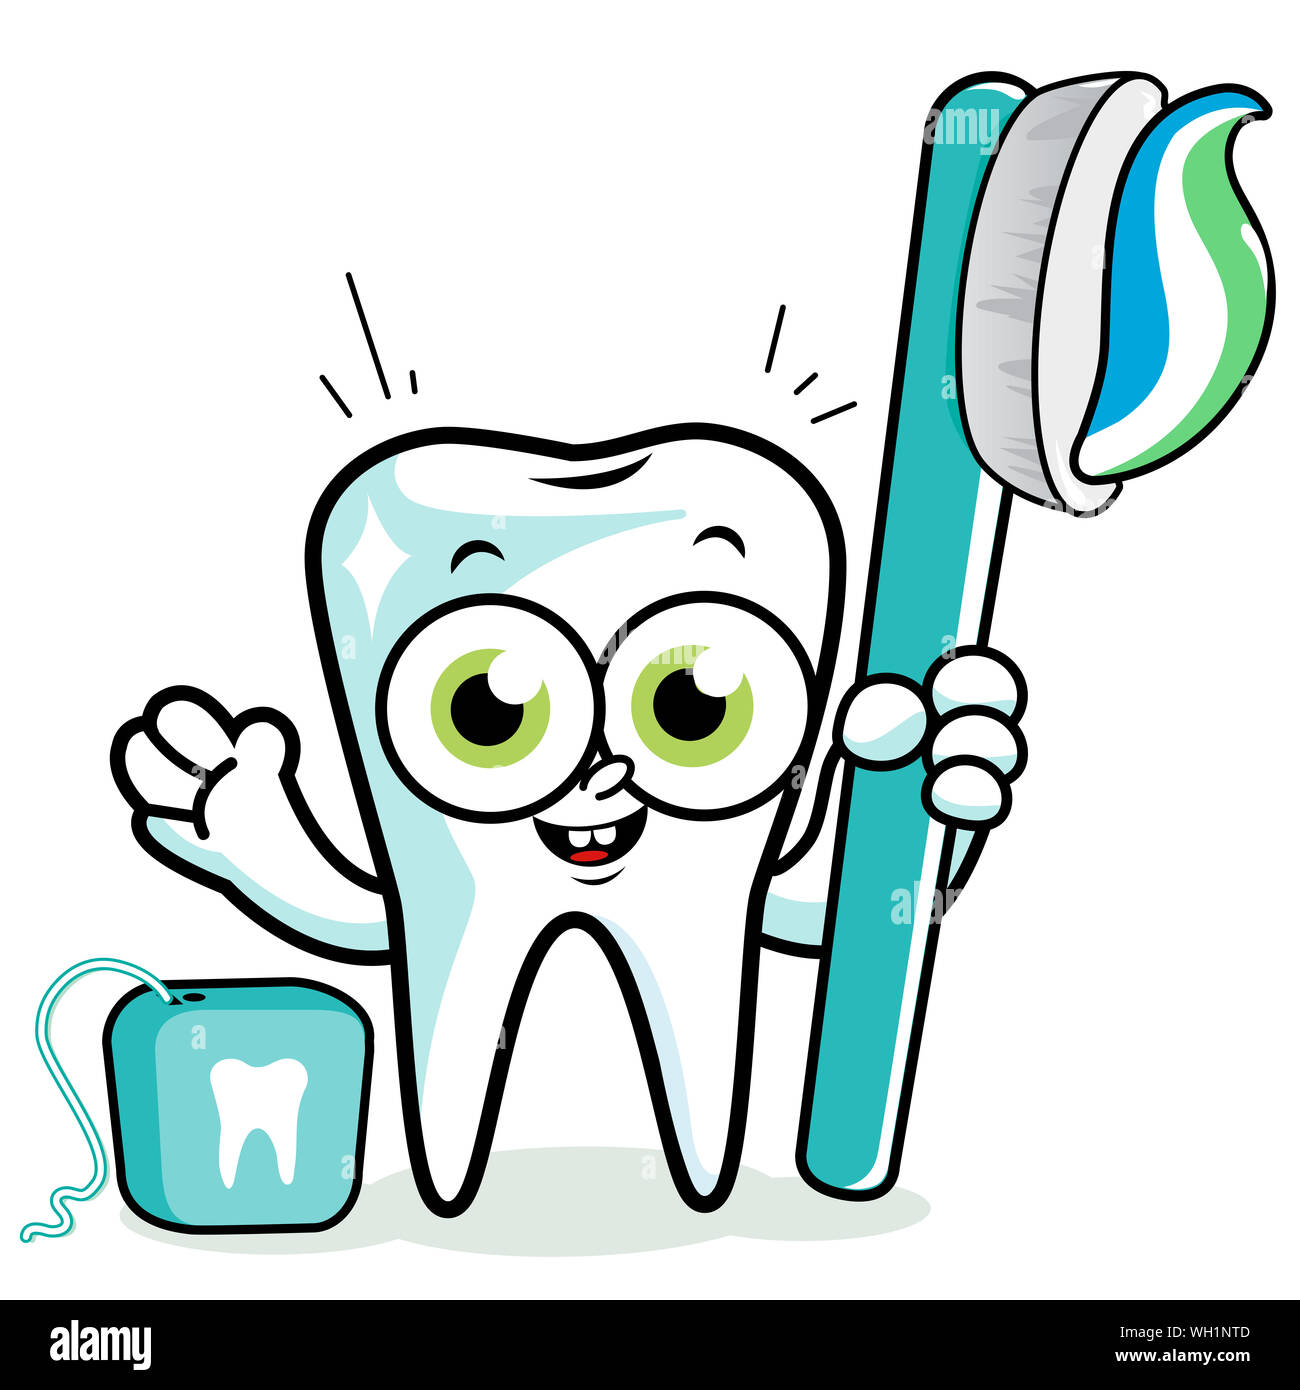 Illustration of a smiling cartoon tooth character holding a toothbrush and dental  floss Stock Photo - Alamy